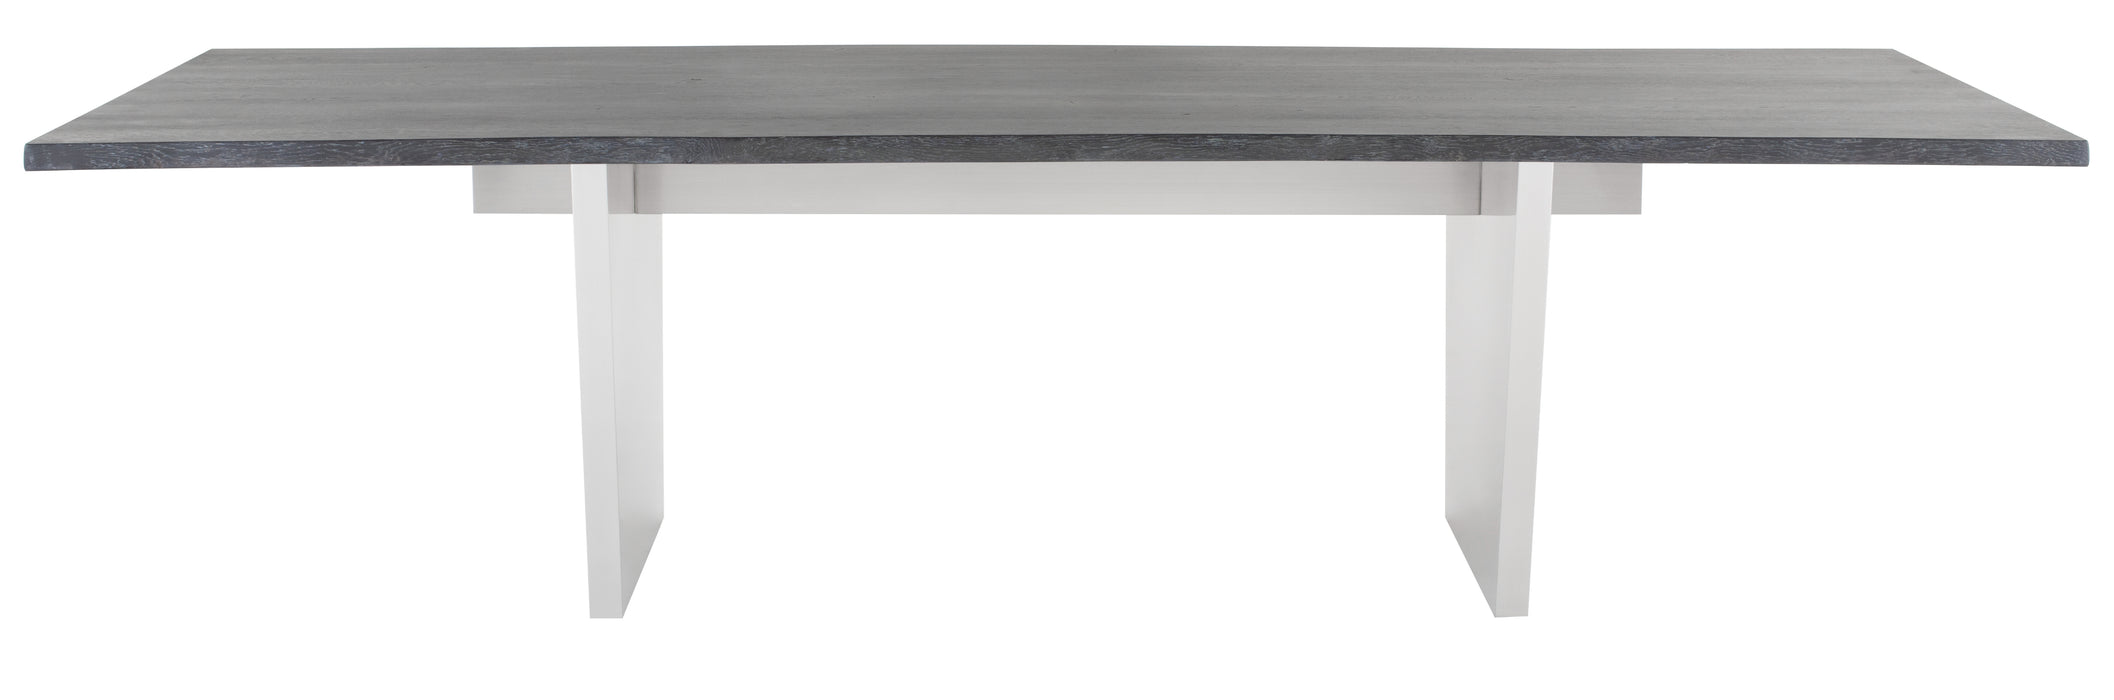 Aiden NL Oxidized Grey Dining Table